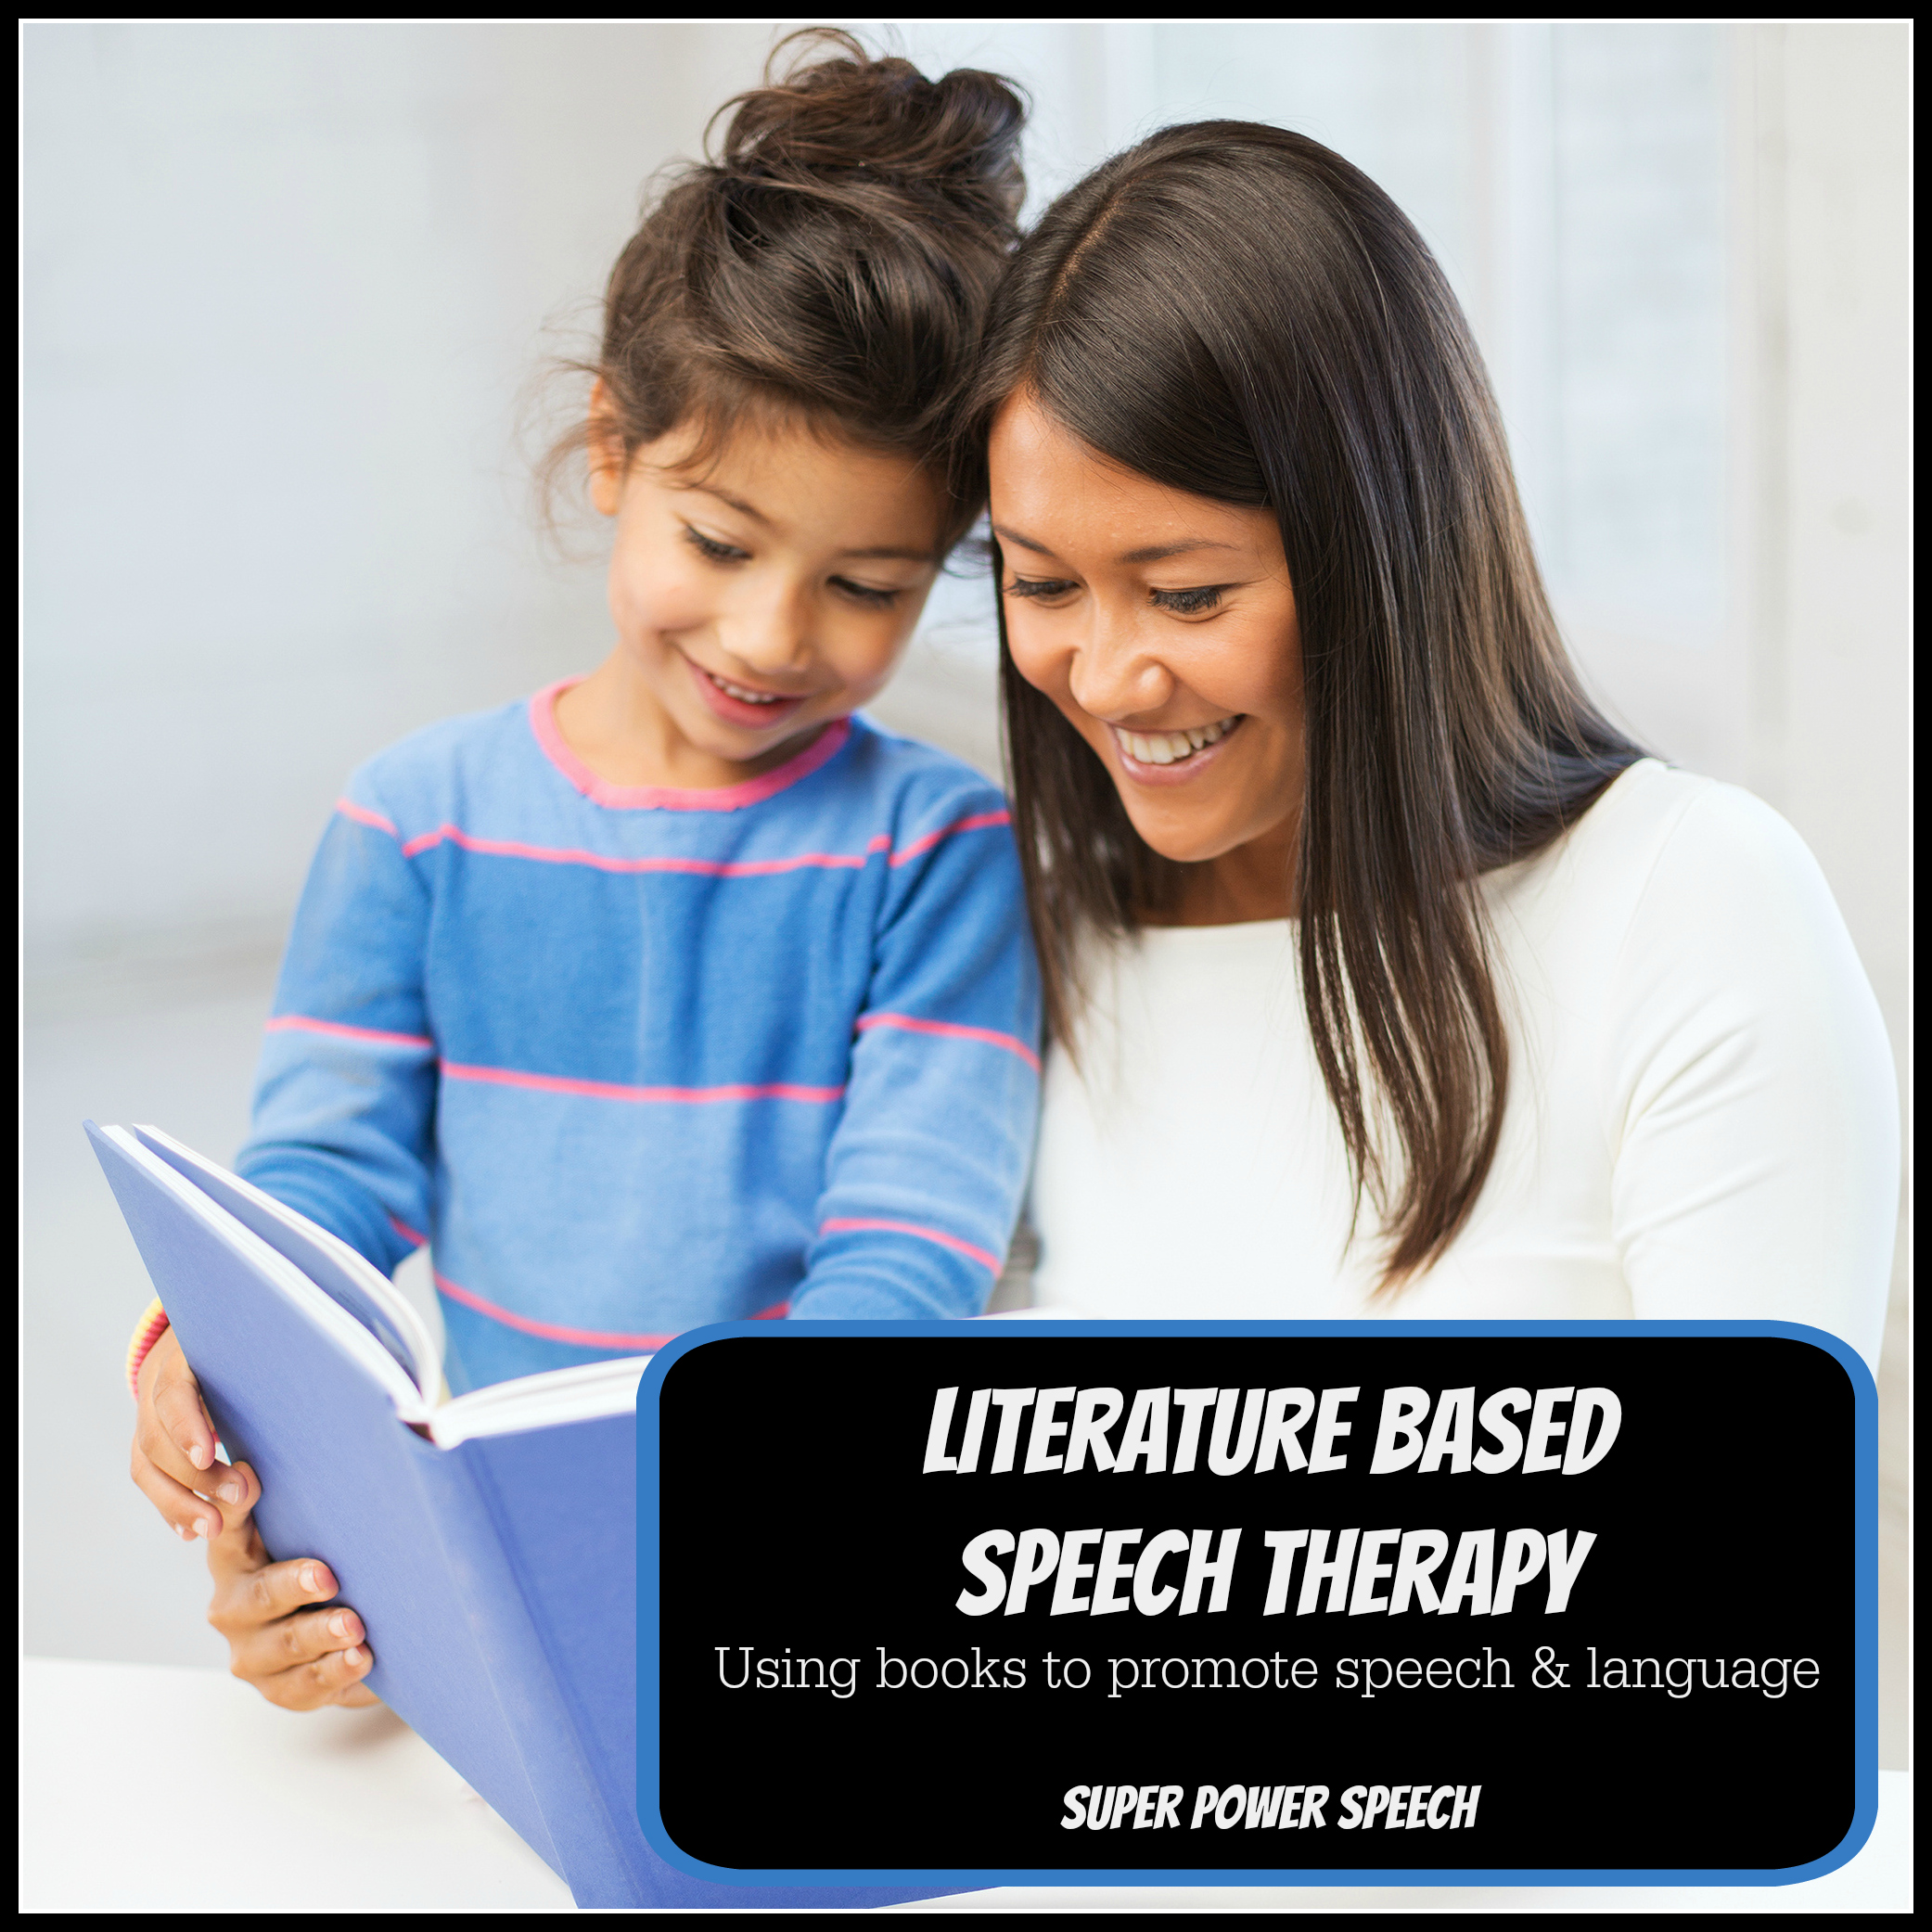 Literature-Based Speech Therapy